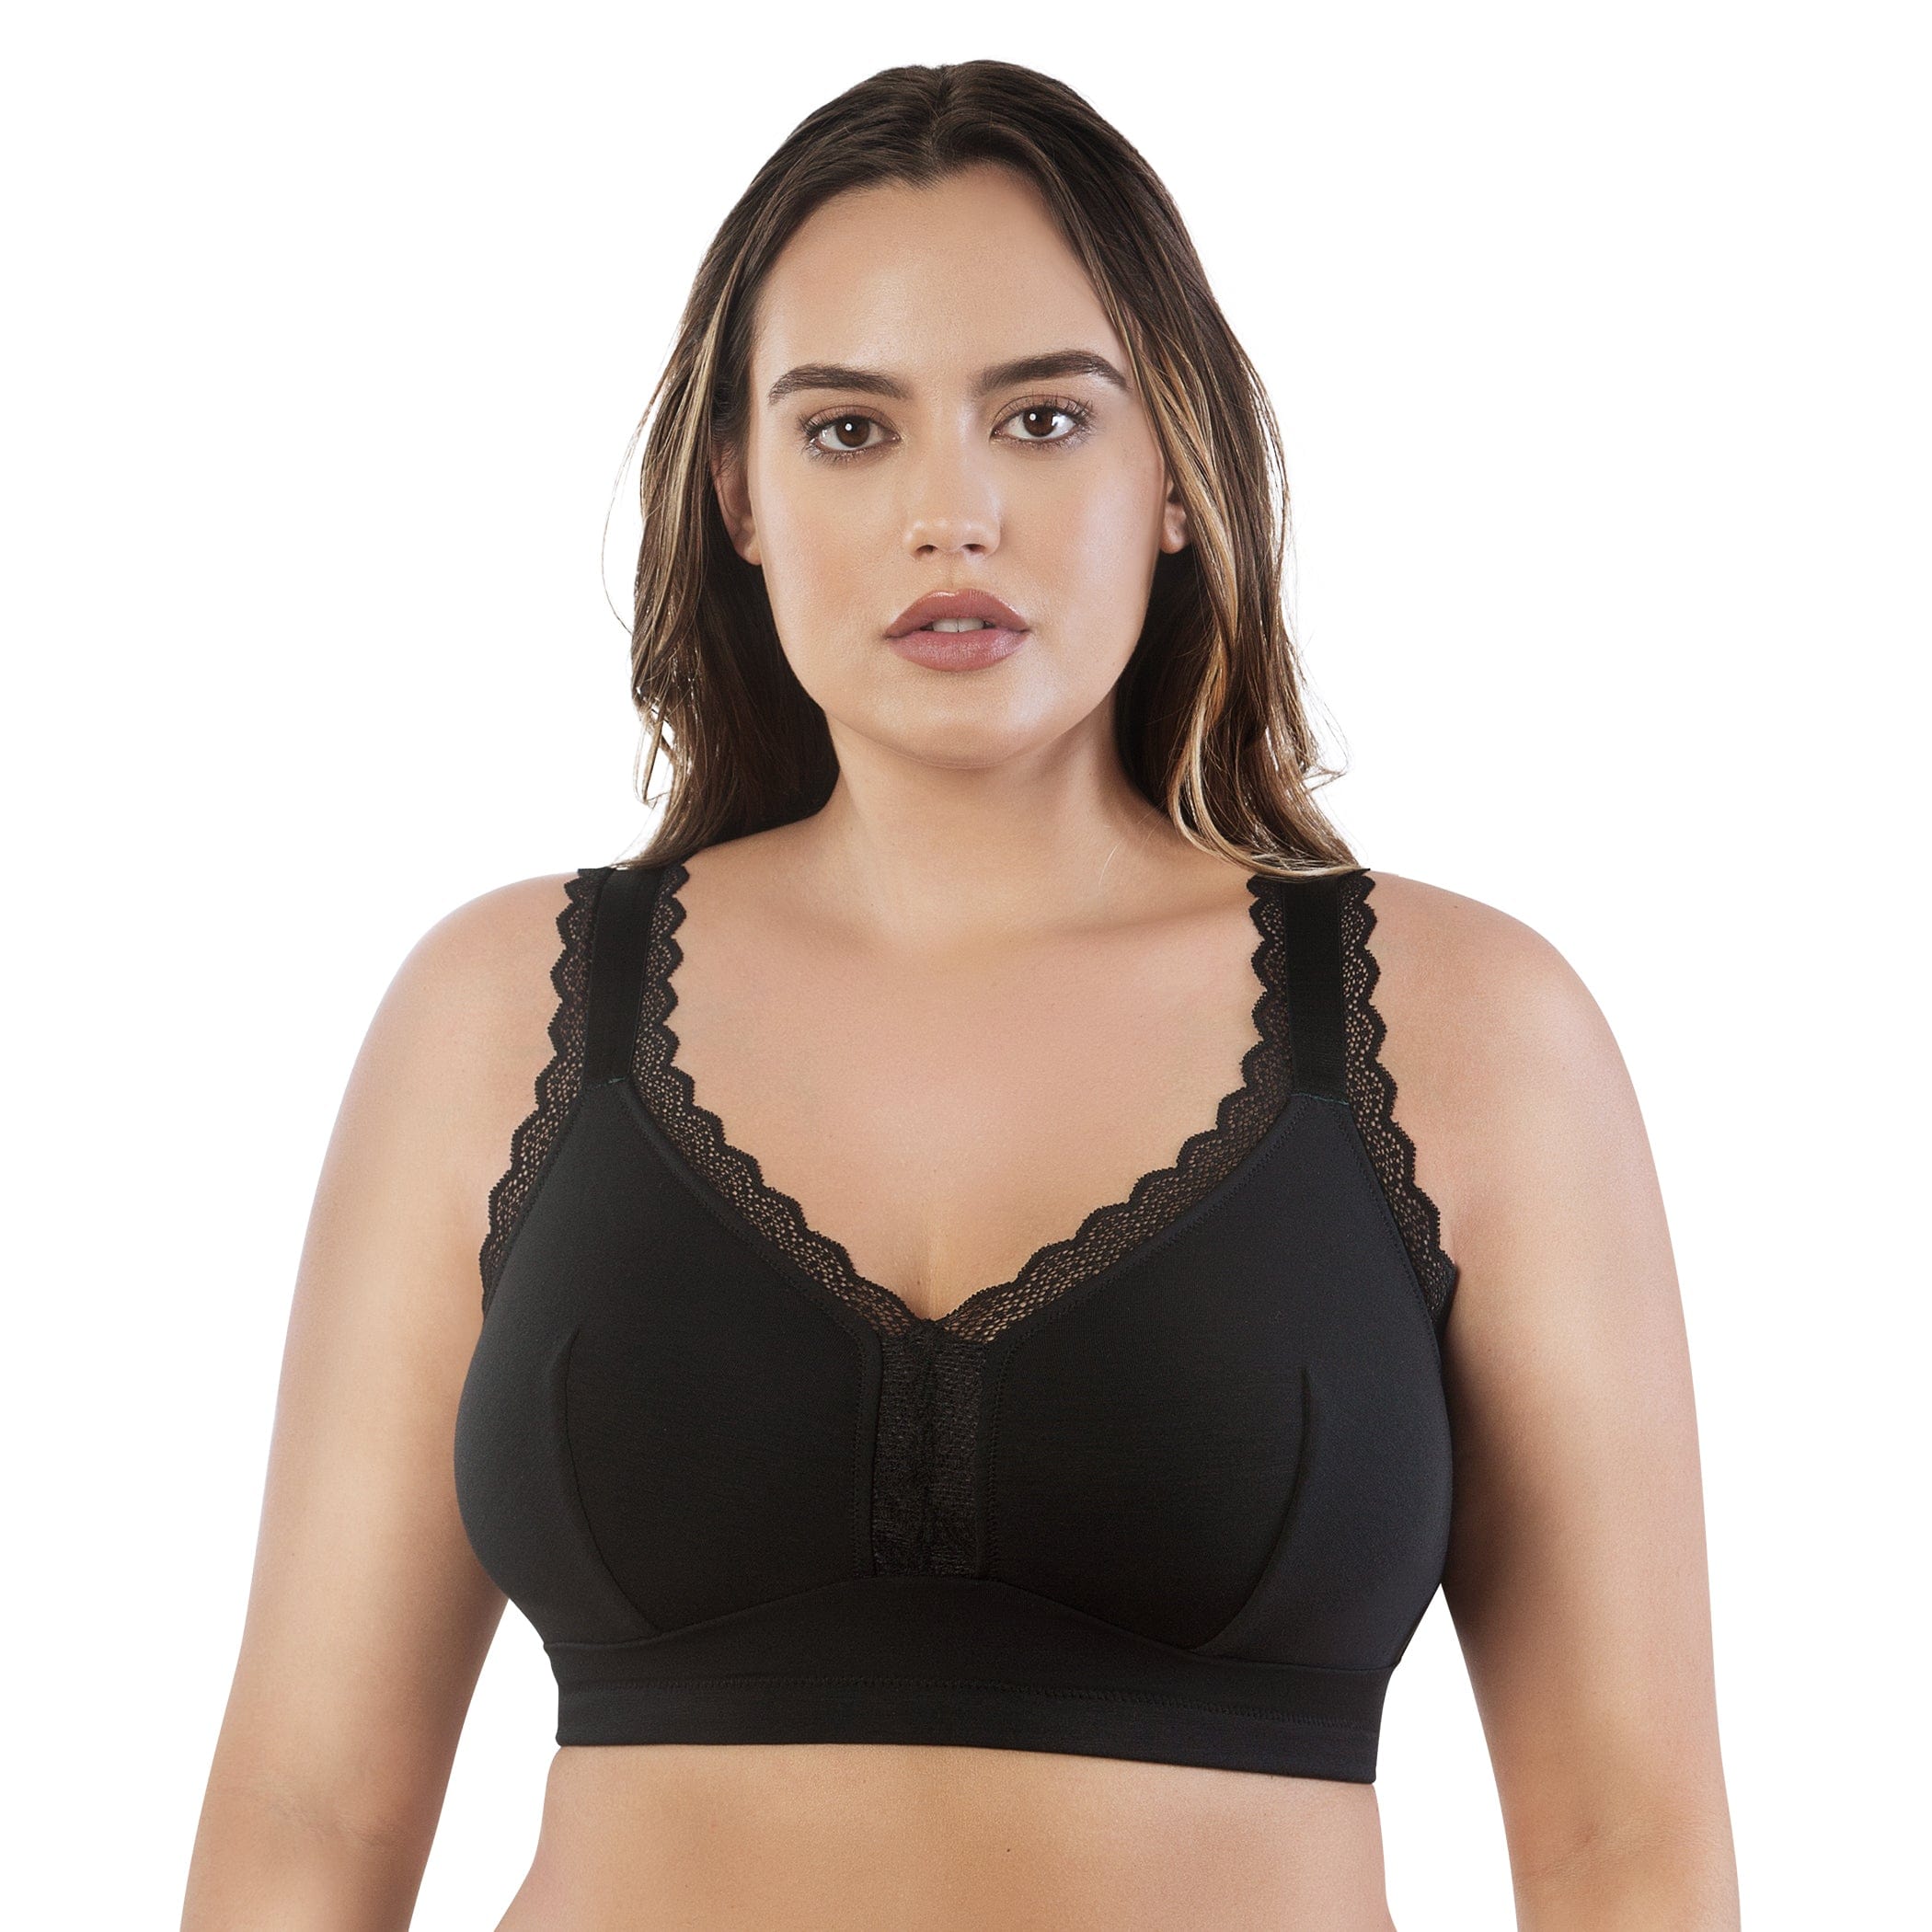 Parfit Dalis Wire-Free, Full Bust Bralette Review - Hurray